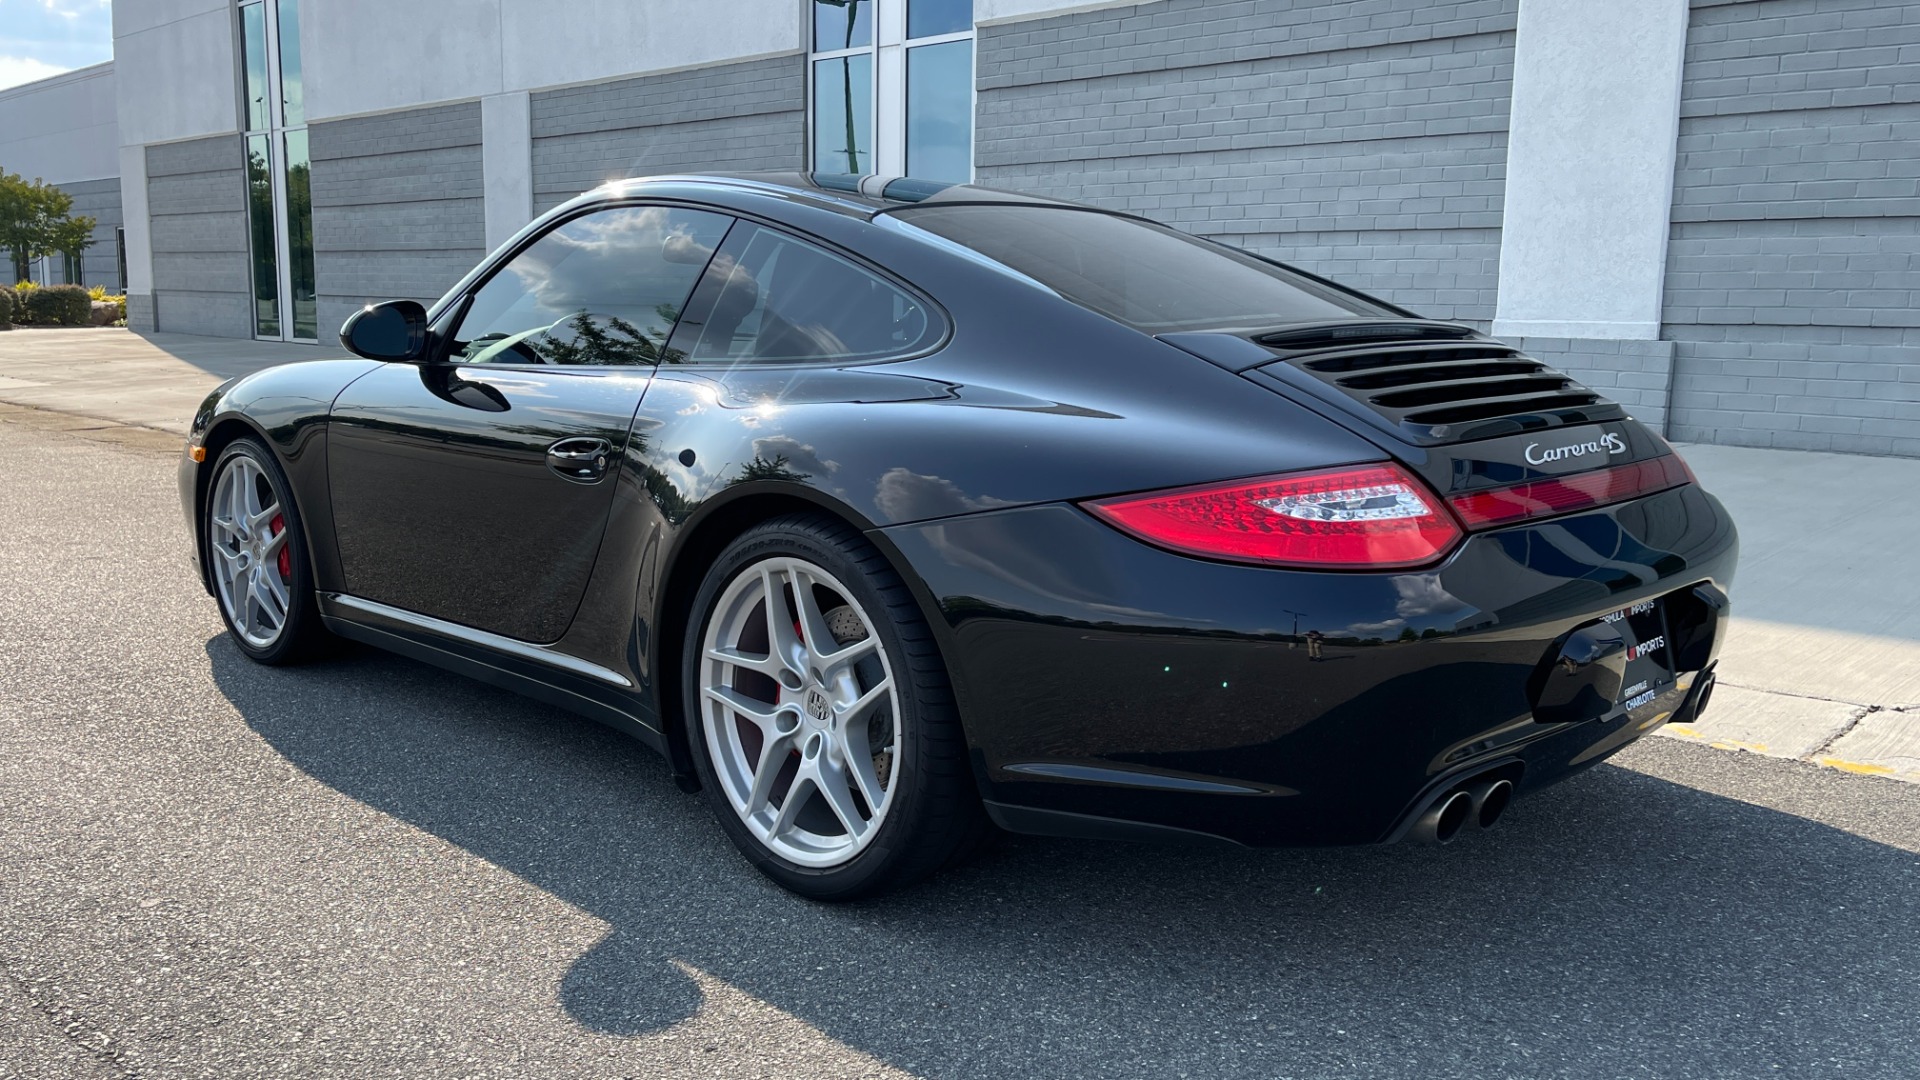 Used 2010 Porsche 911 Carrera 4S / PDK / LEATHER / BLUETOOTH / VENTILATED SEATS / BOSE SOUND for sale $77,995 at Formula Imports in Charlotte NC 28227 6